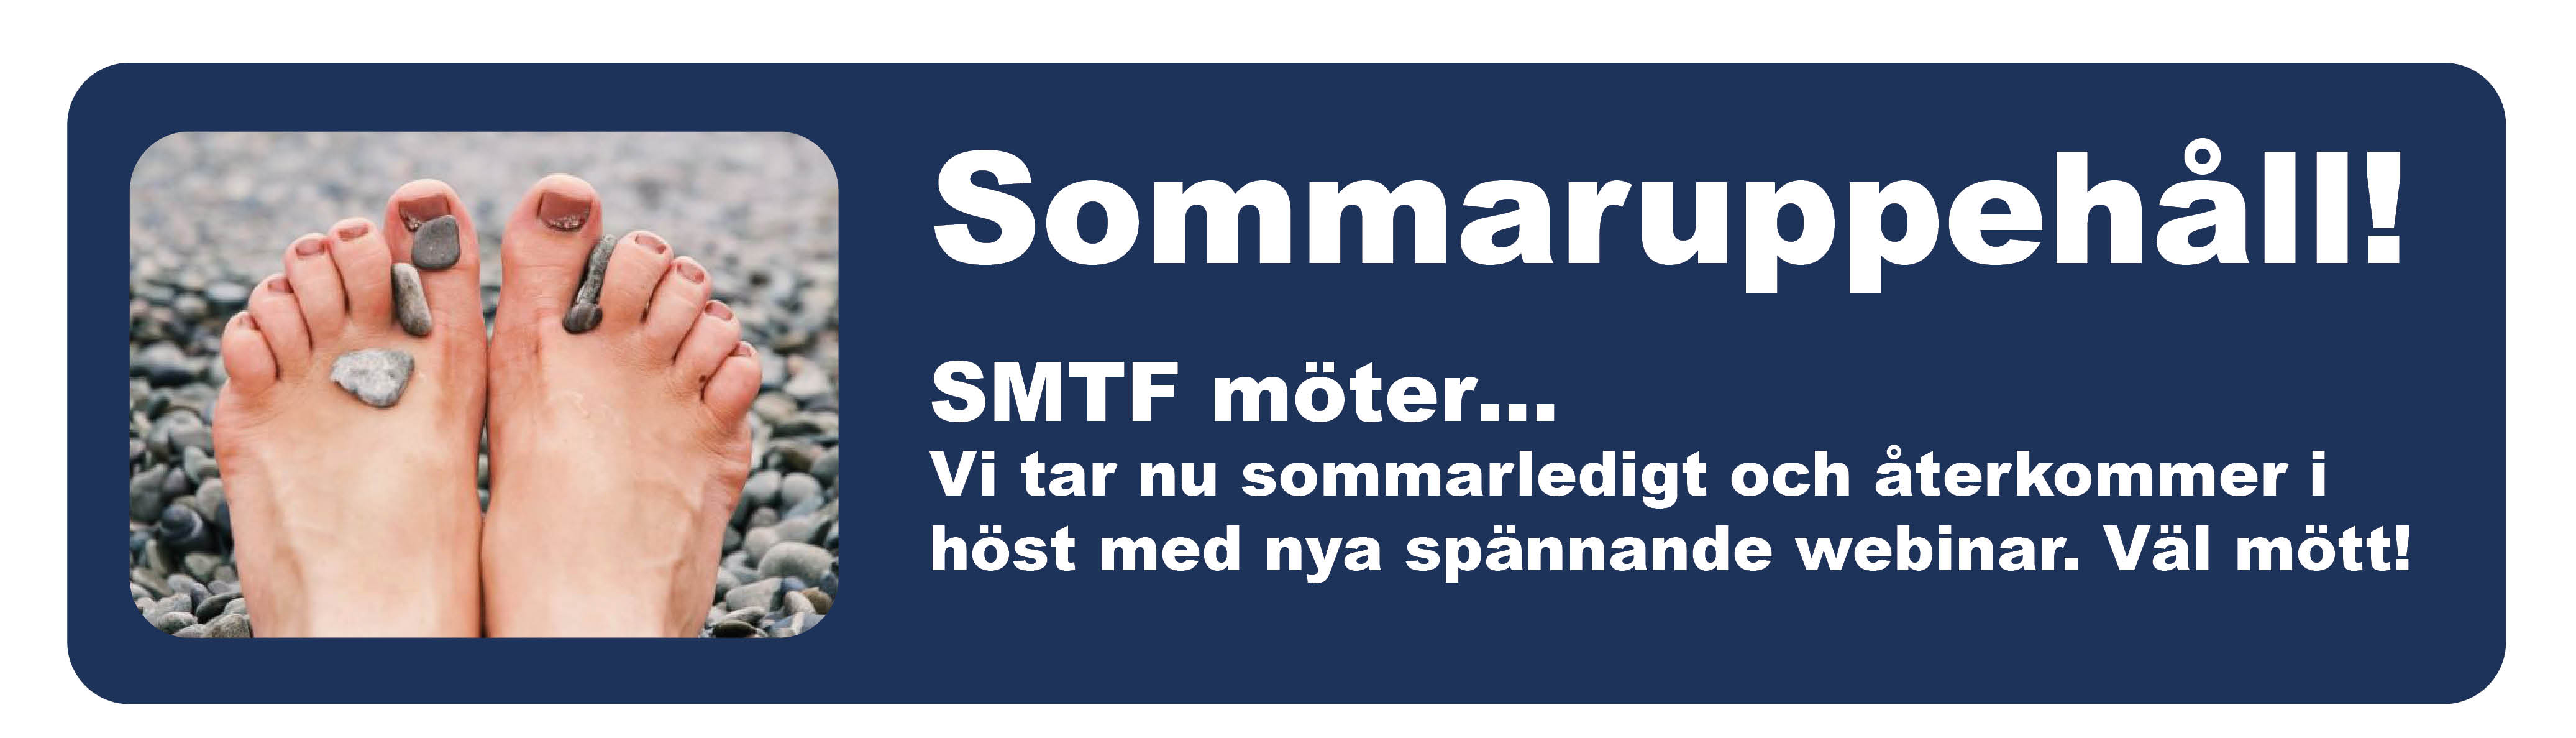 20375 sommaruppeh%c3%a5ll